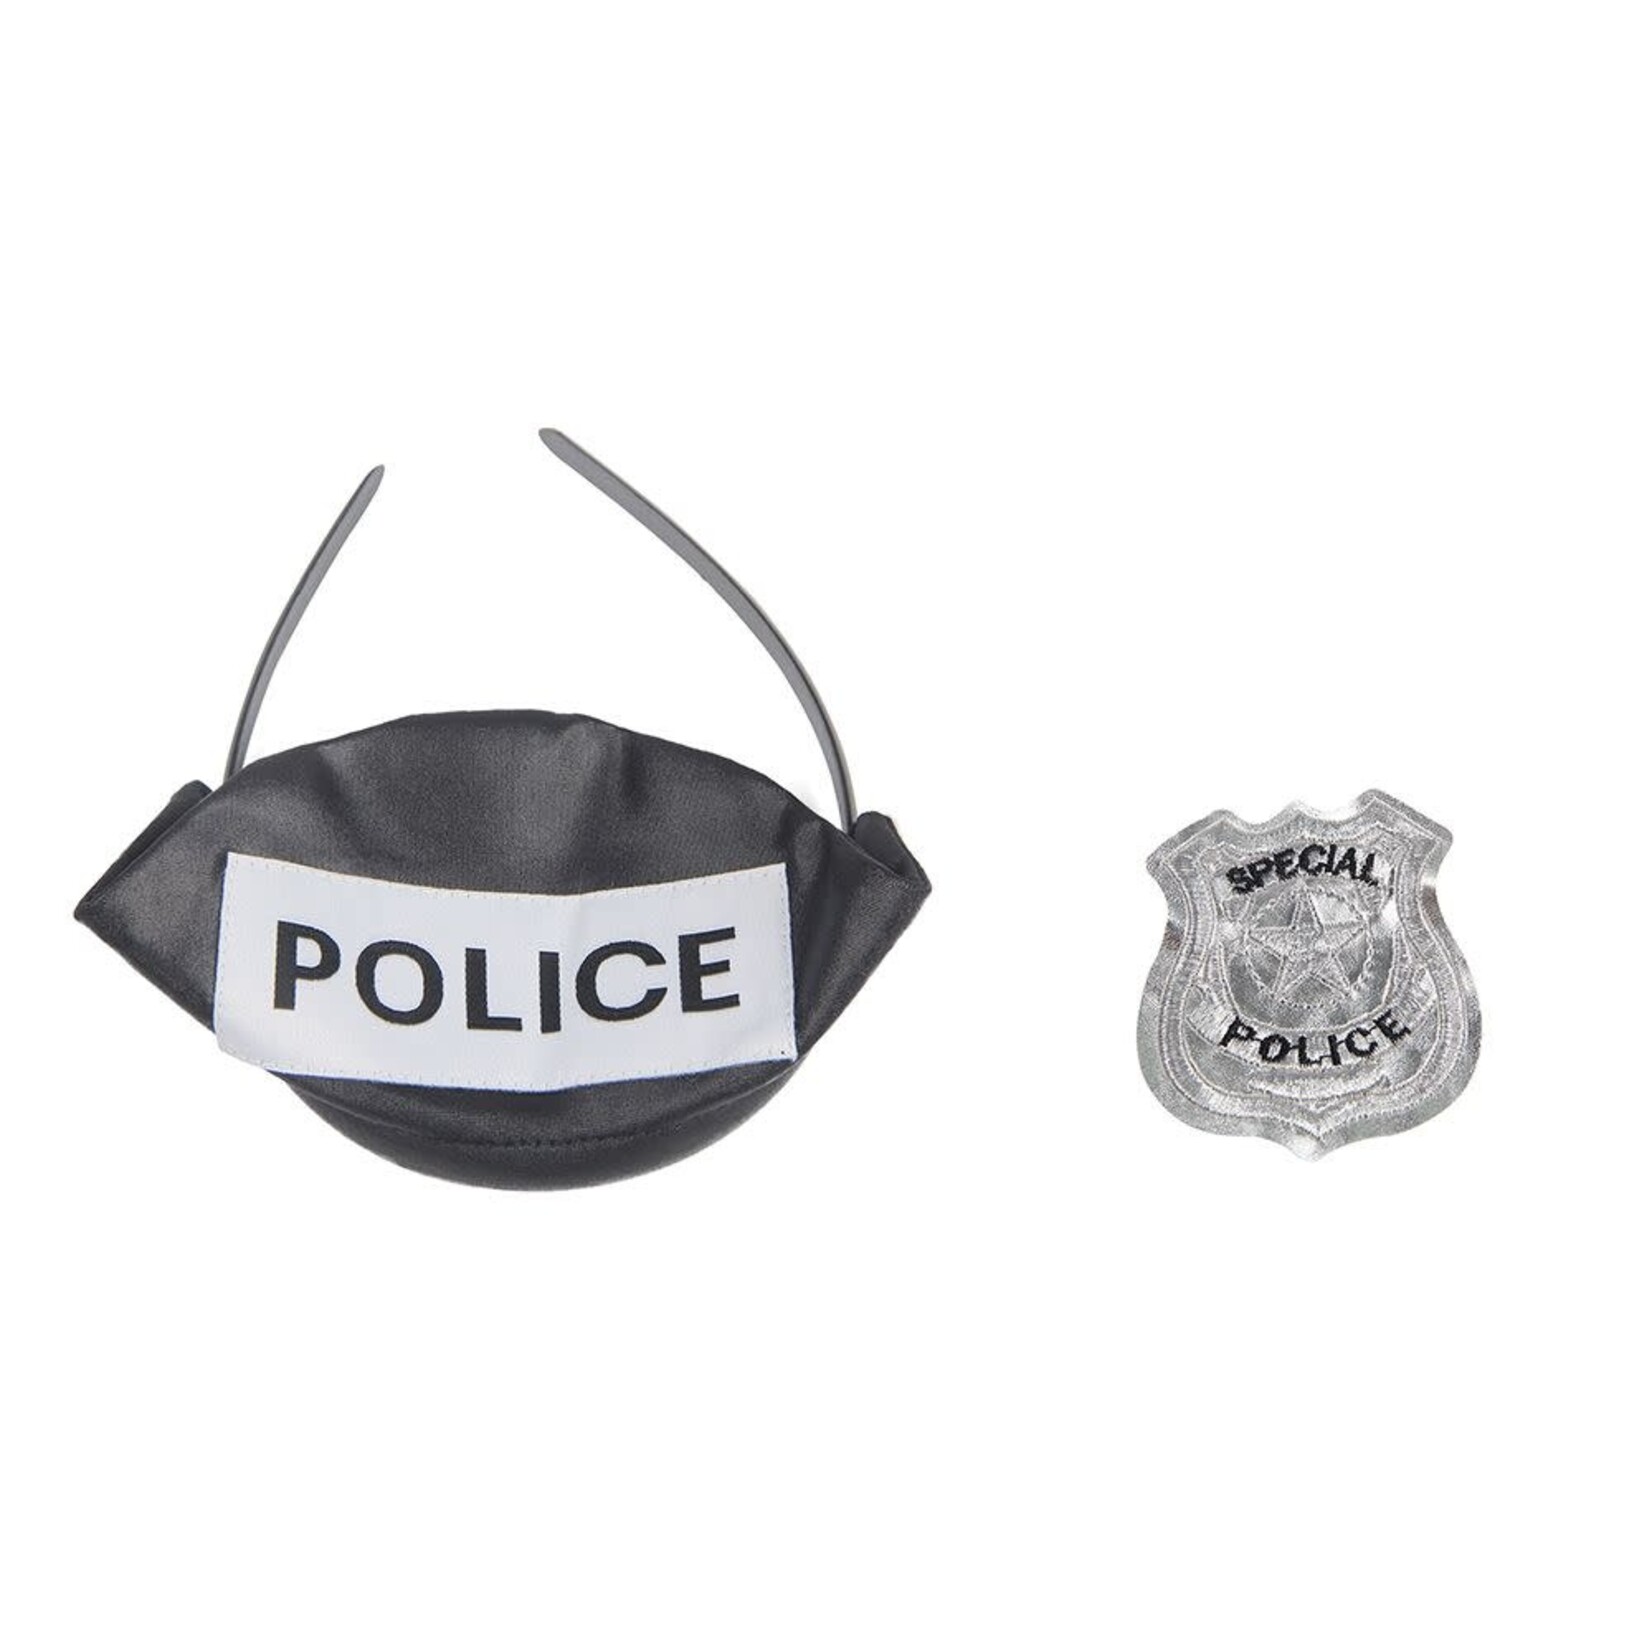 OH YEAH! -  ZIPPER FRONT HOLLOW OUT POLICE COSTUME WITH HEADWEAR XS-S